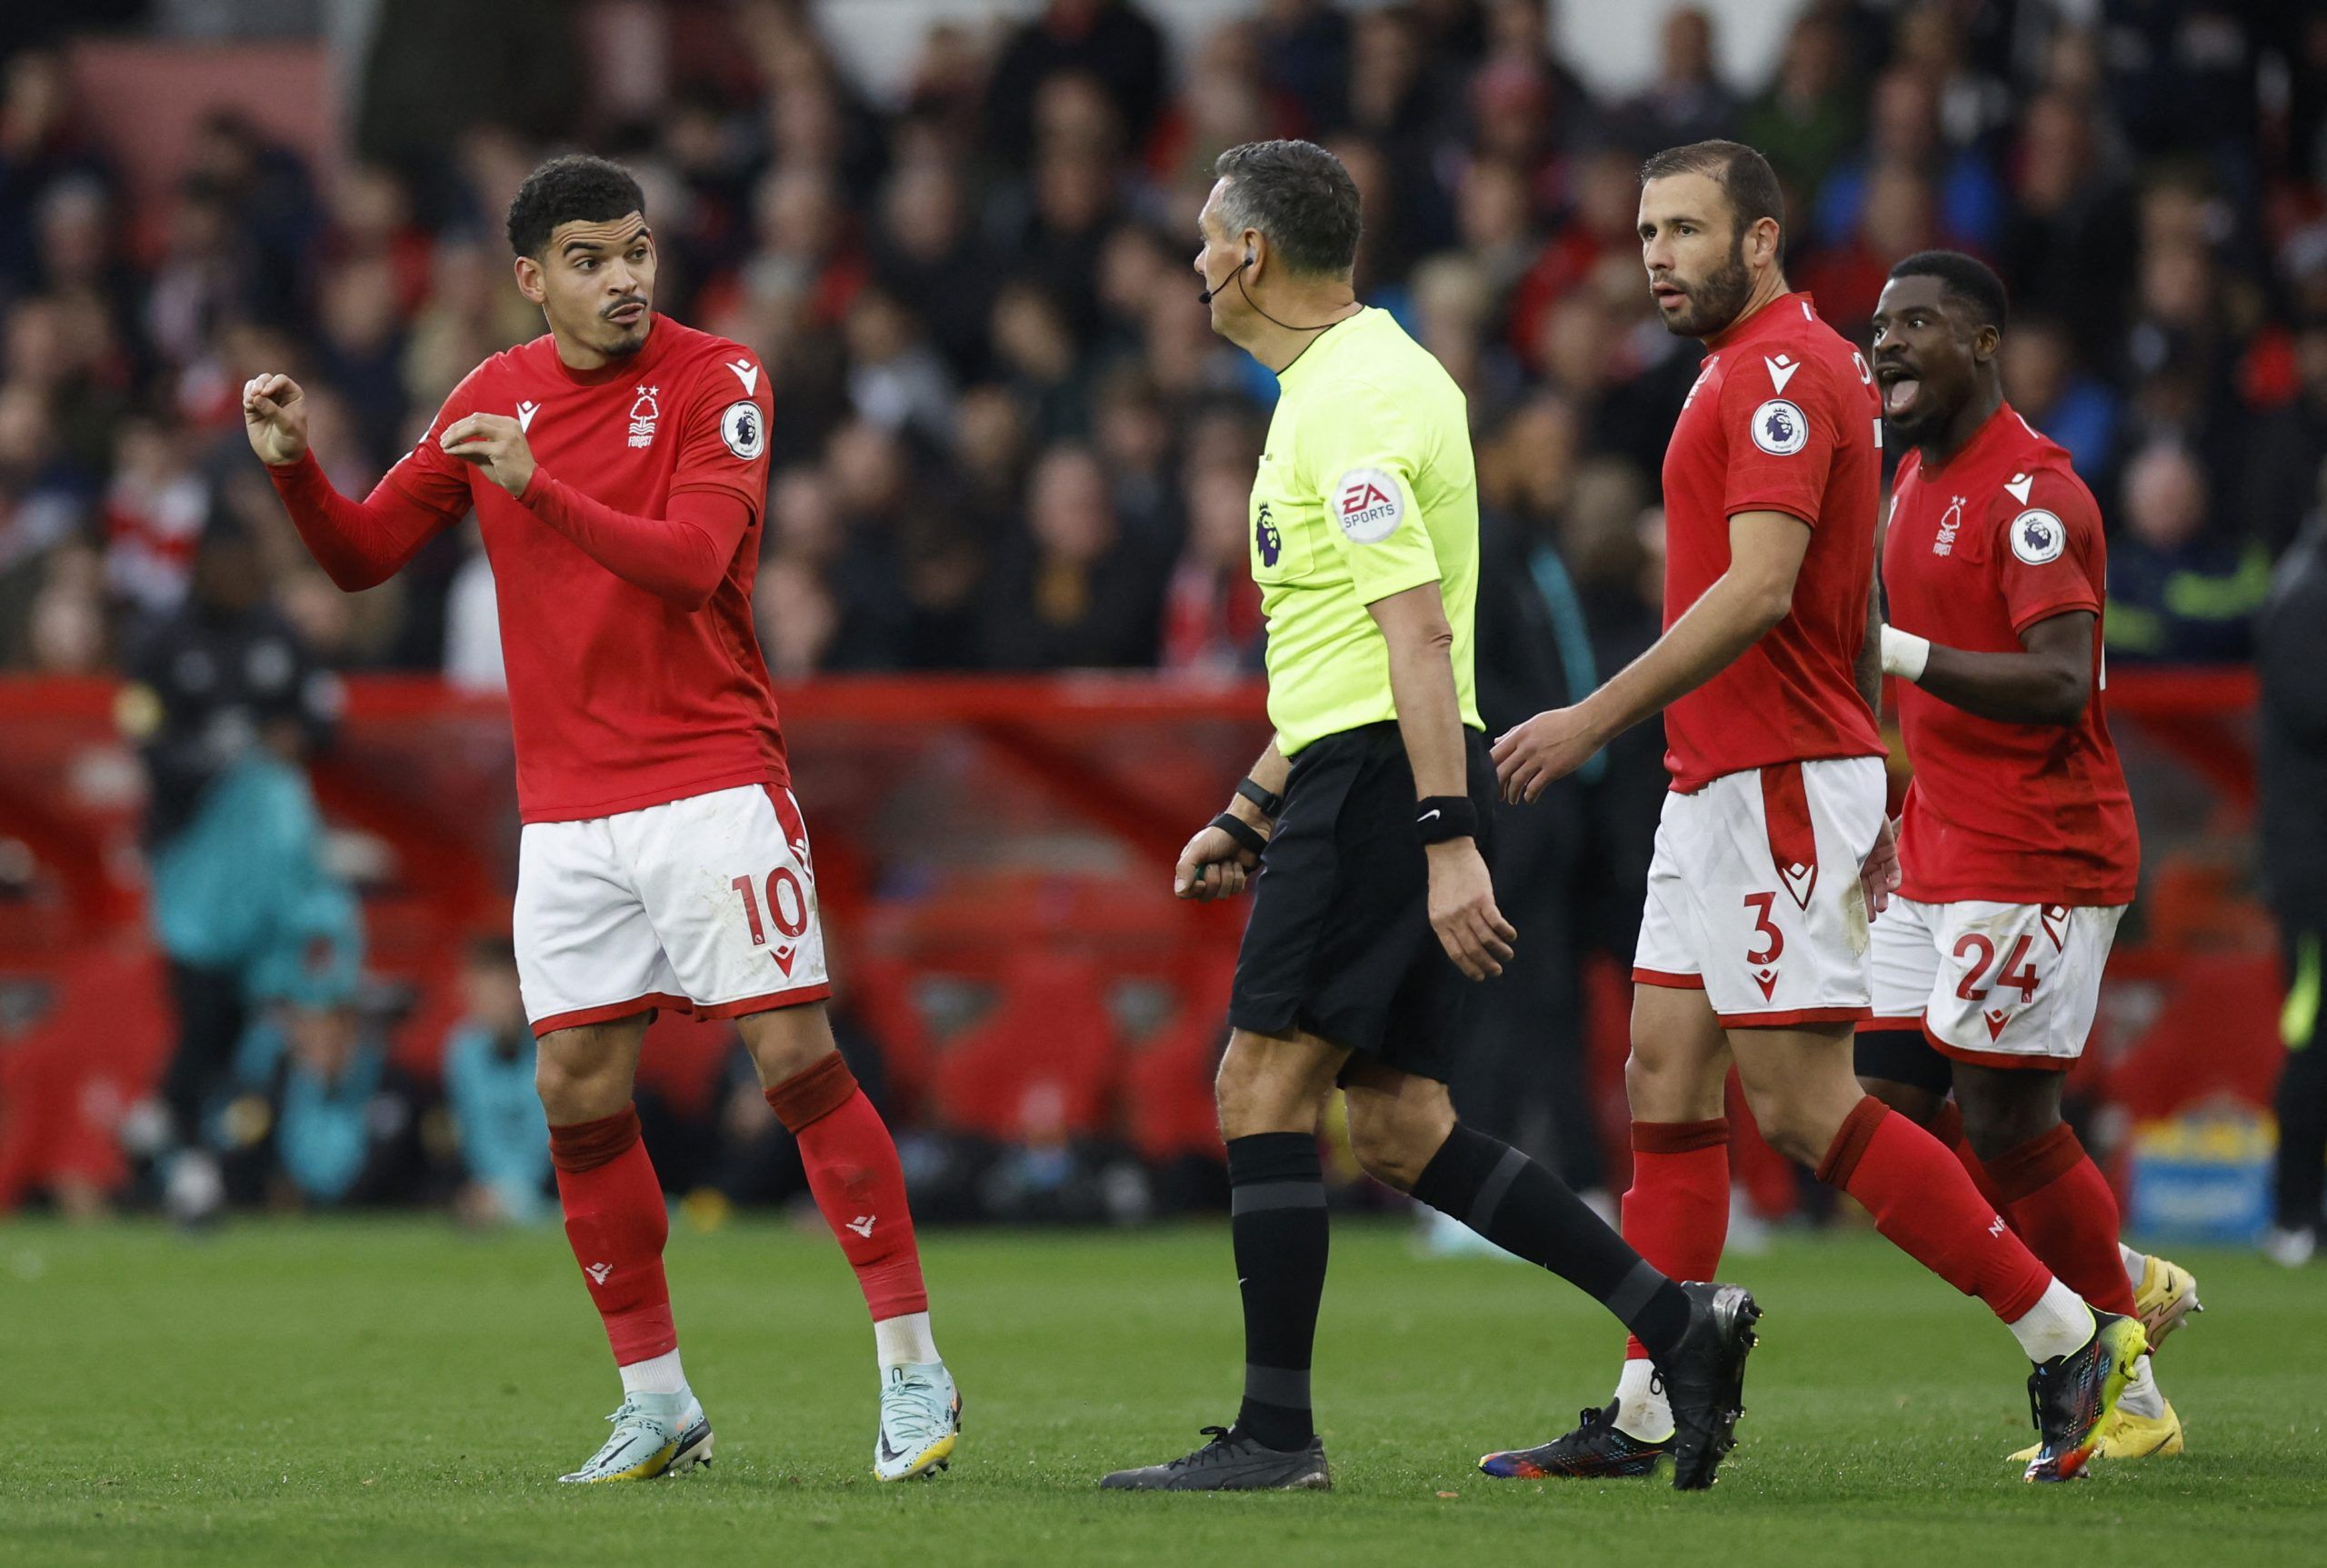 Soccer Football - Premier League - Nottingham Forest v Brentford - The City Ground, Notthingham, Britain - November 5, 2022 Nottingham Forest's Morgan Gibbs-White remonstrates with referee Andre Marriner after he gave Brentford a penalty Action Images via Reuters/Peter Cziborra EDITORIAL USE ONLY. No use with unauthorized audio, video, data, fixture lists, club/league logos or 'live' services. Online in-match use limited to 75 images, no video emulation. No use in betting, games or single club /